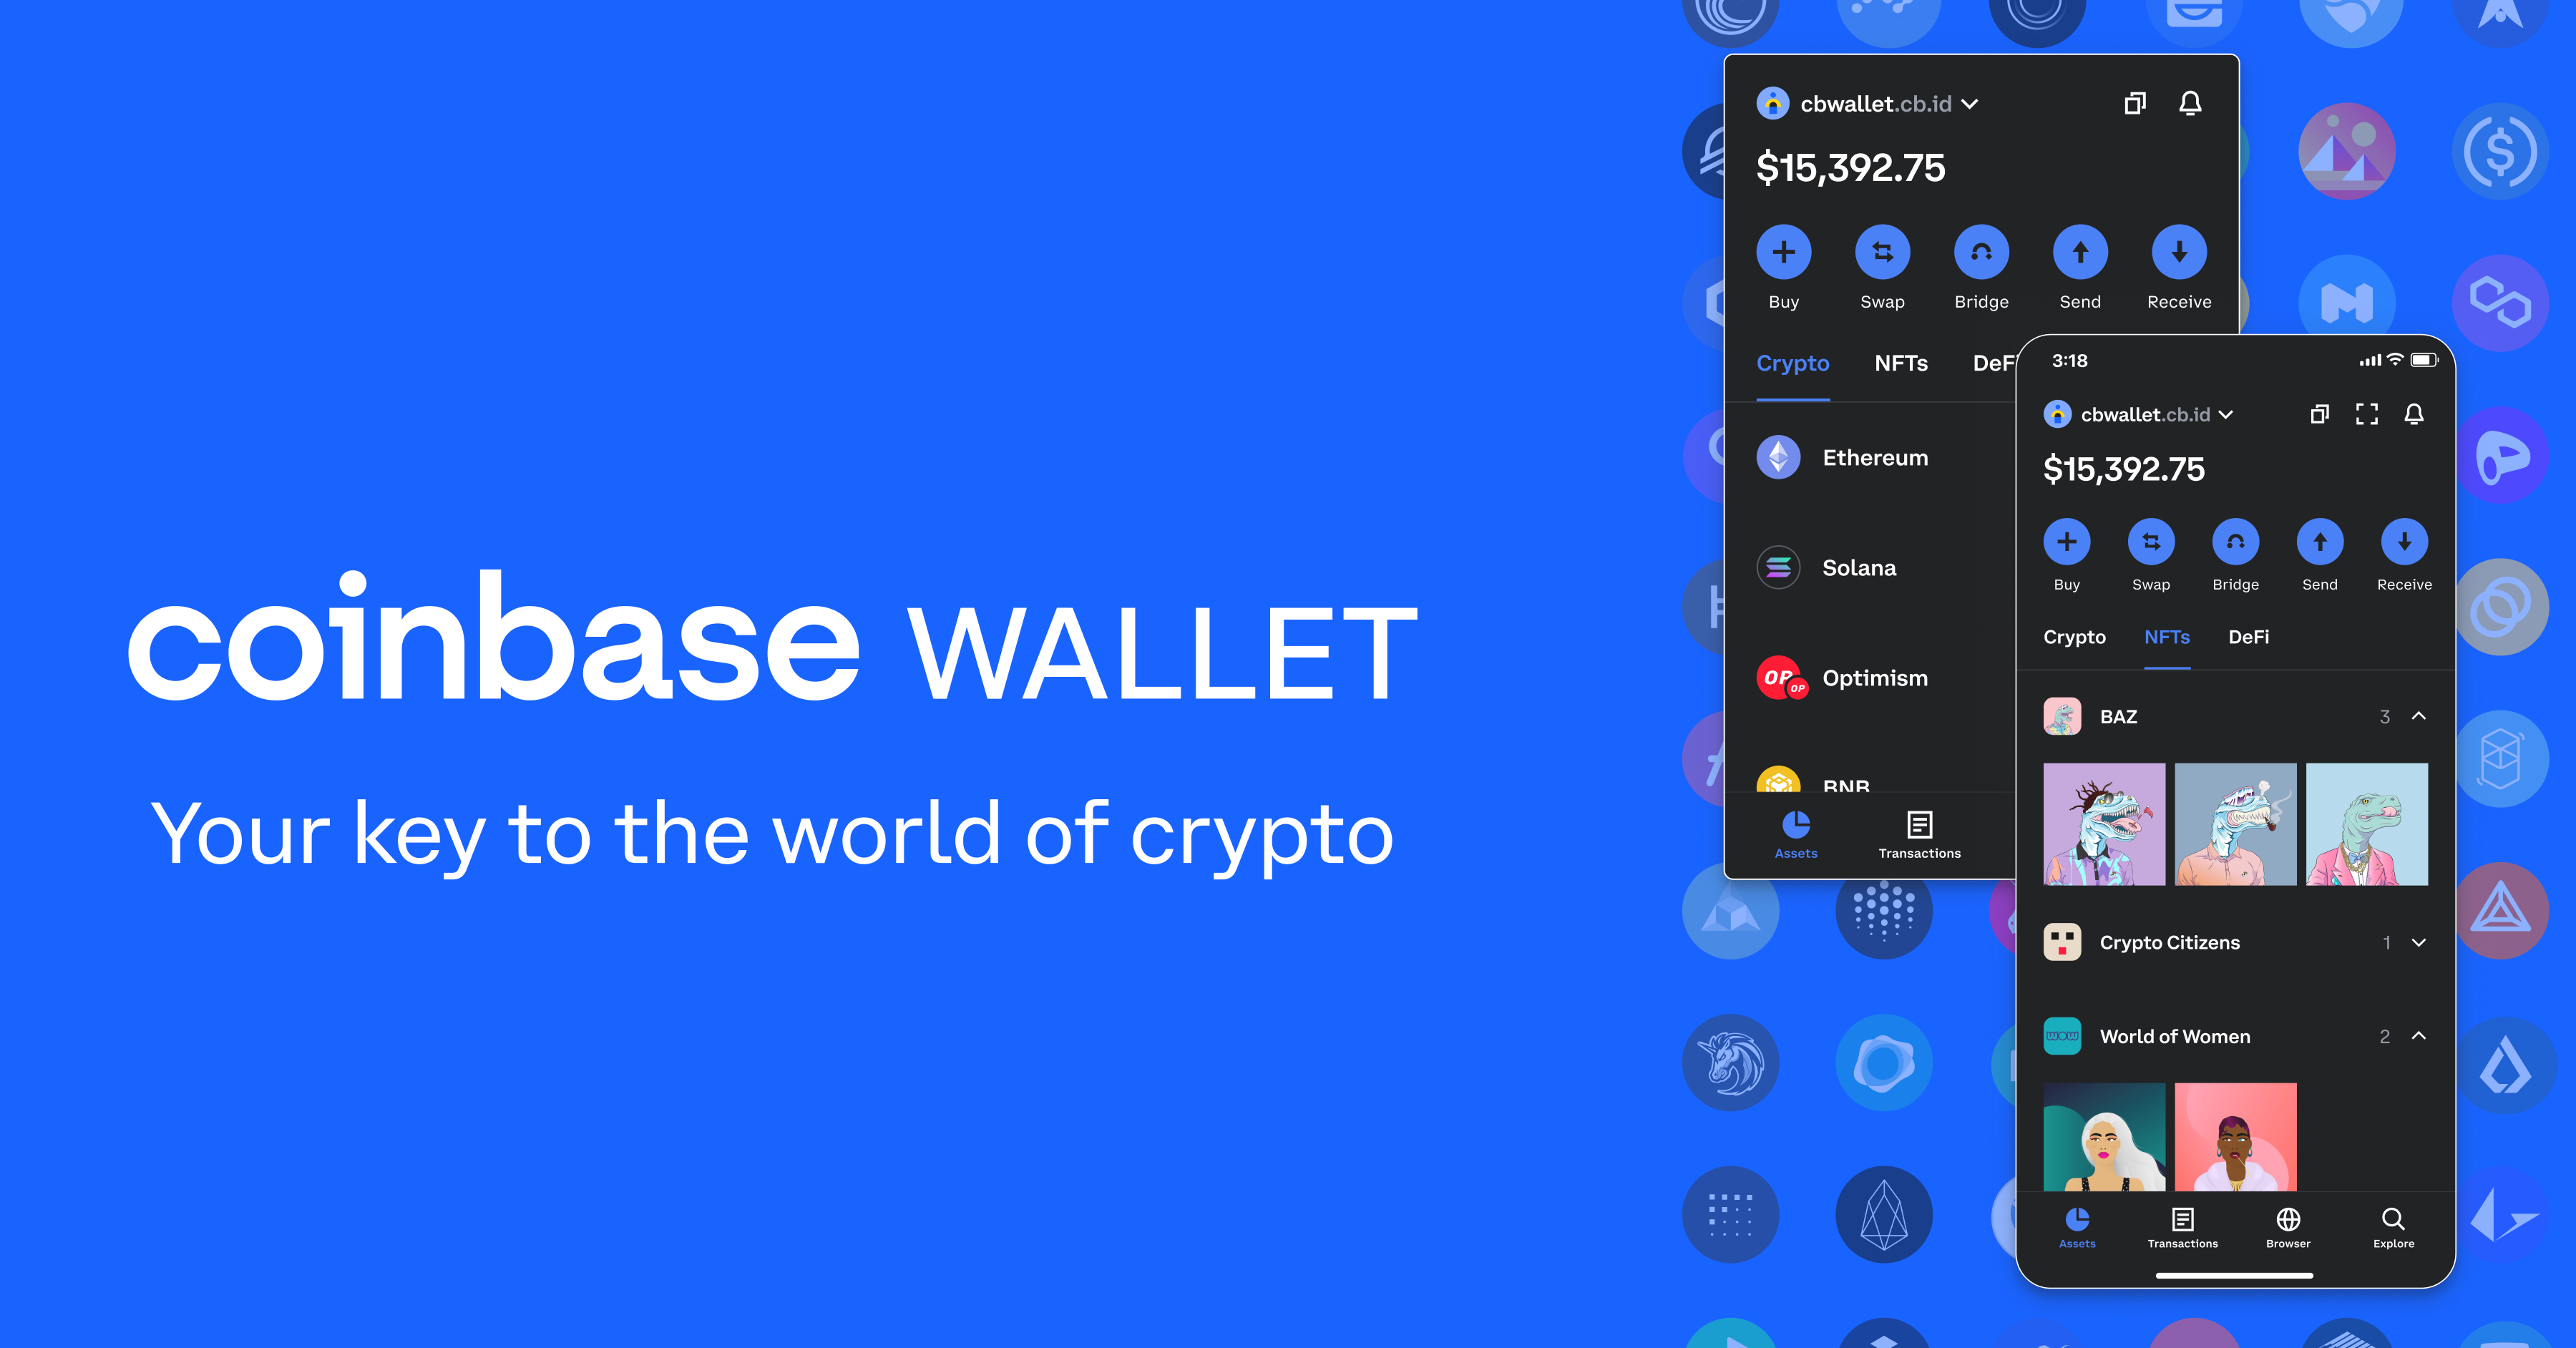 Download Coinbase Wallet - Your key to the world of crypto